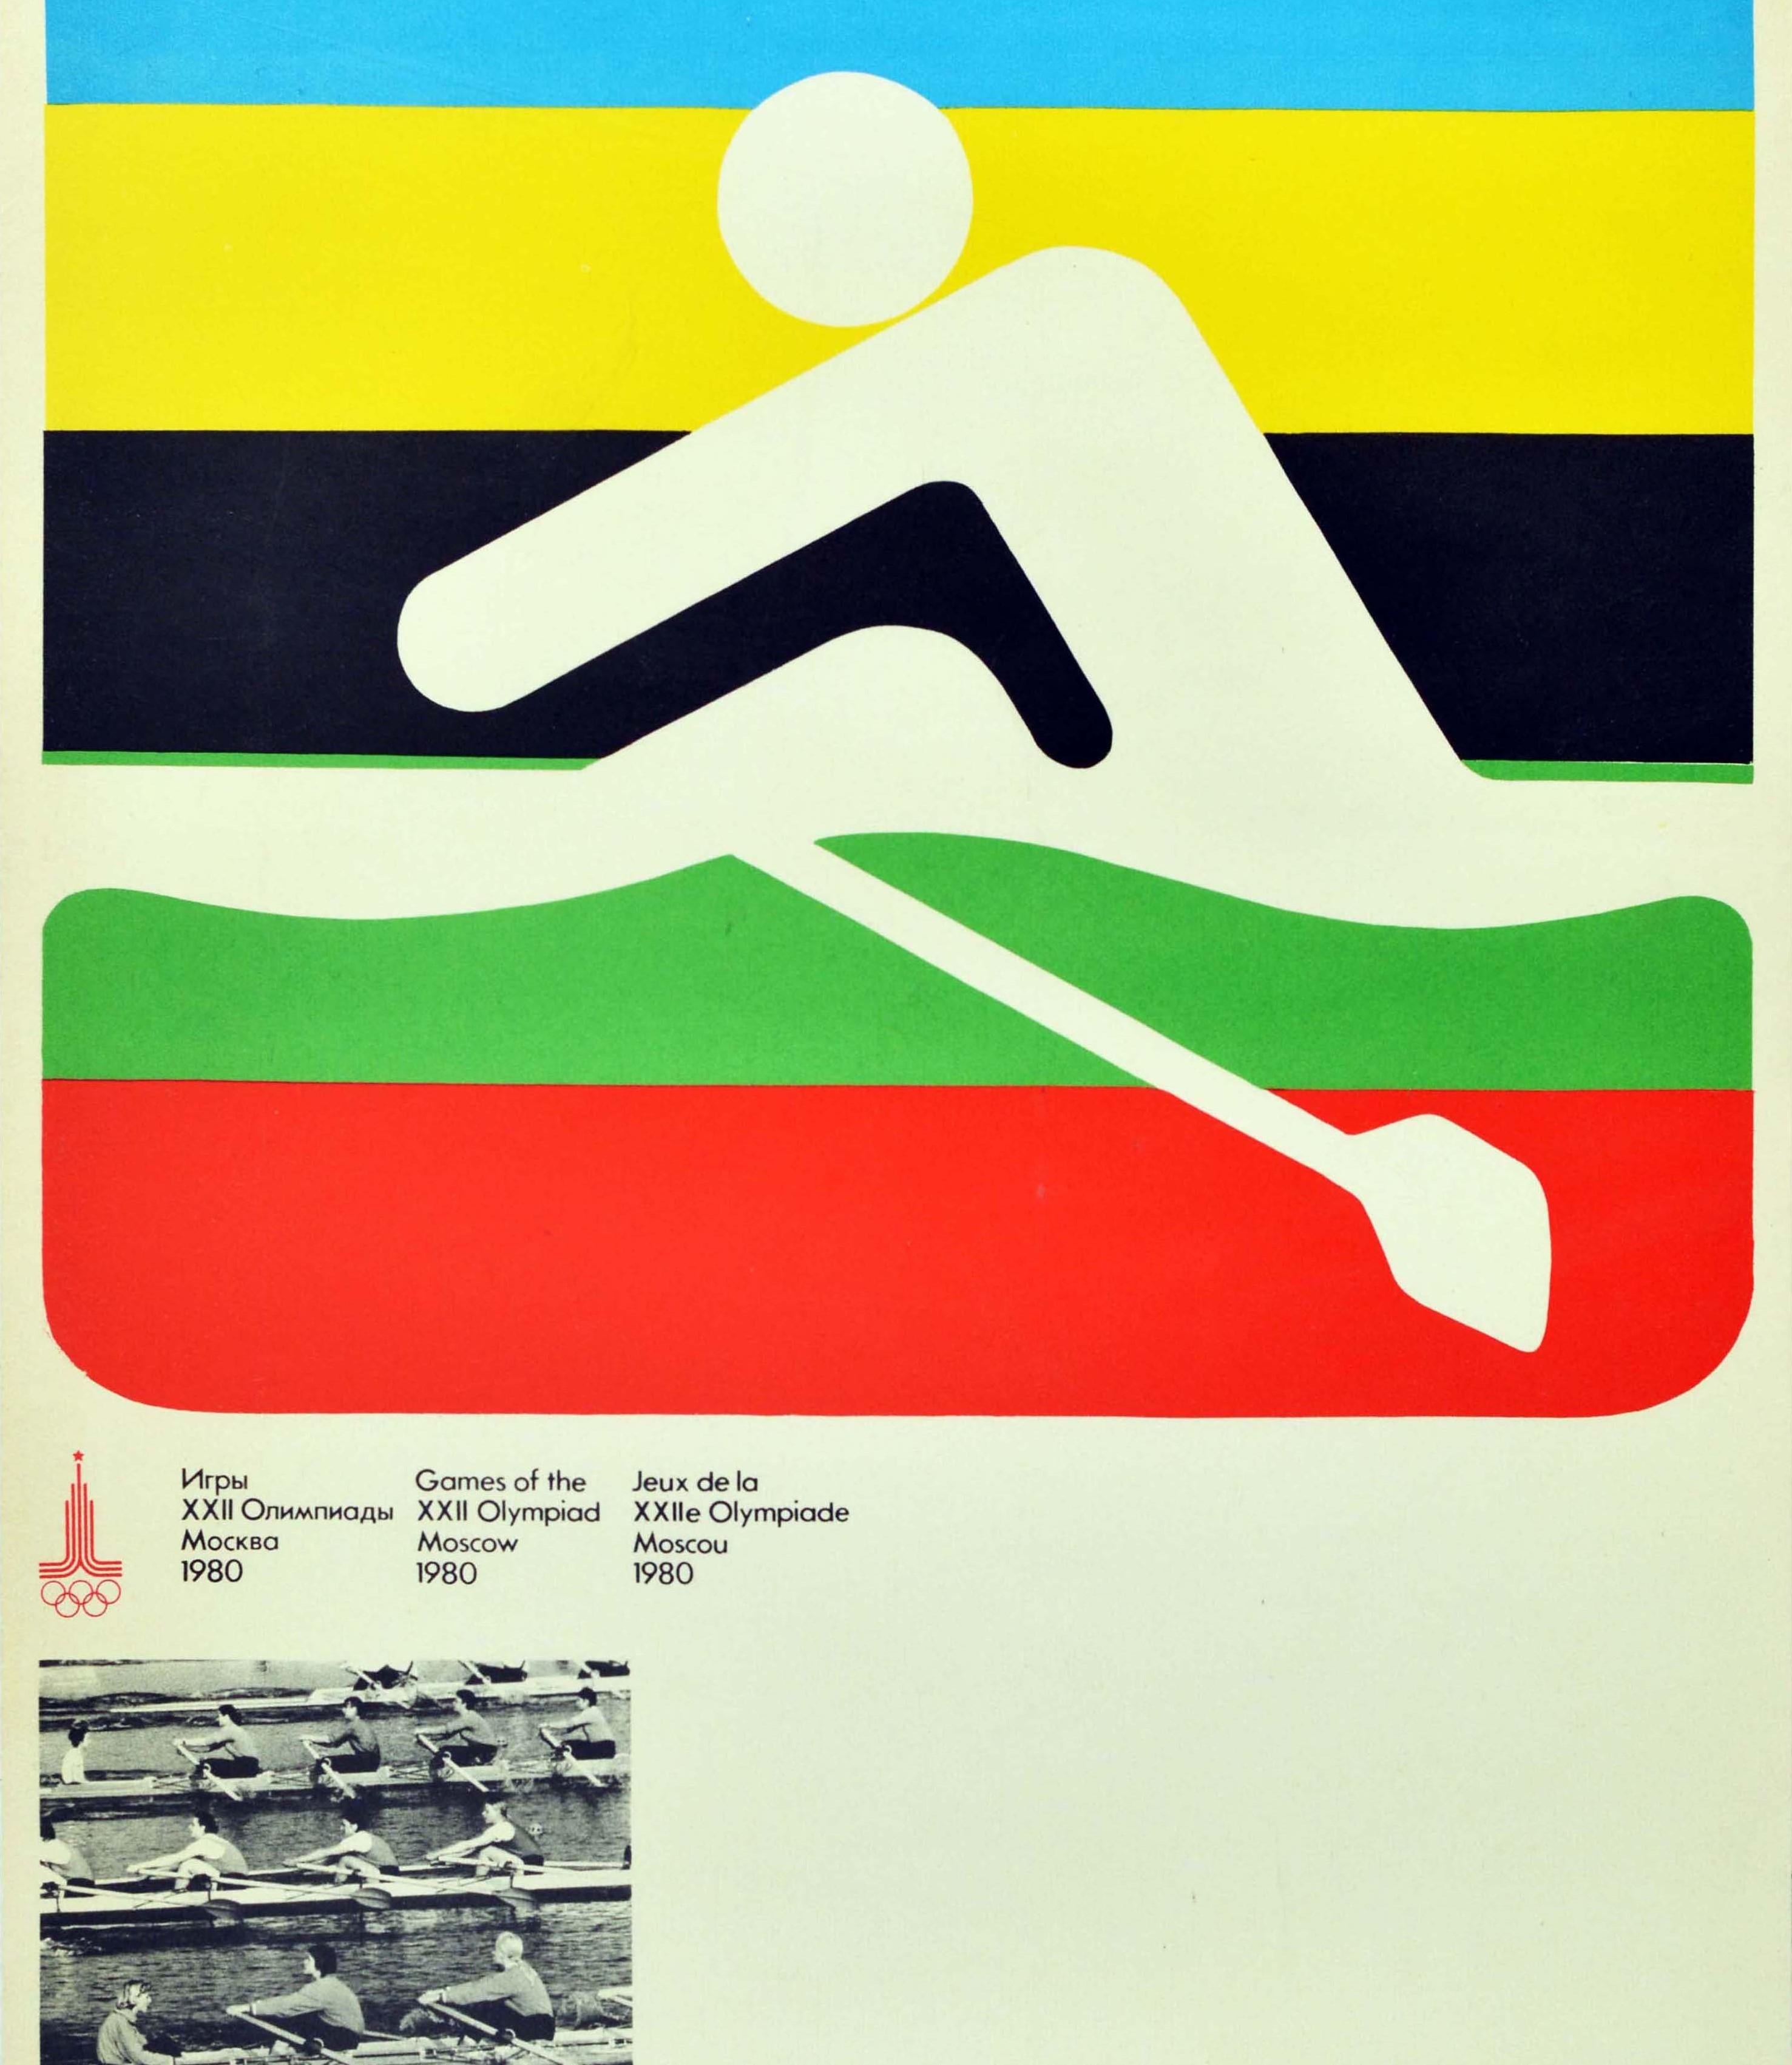 Original vintage sport poster for the Academic Rowing event at the 22nd Summer Olympic Games / Games of the XXII Olympiad in 1980 held in Moscow Russia featuring a colourful pictogram design for Olympic rowing against a striped background of the